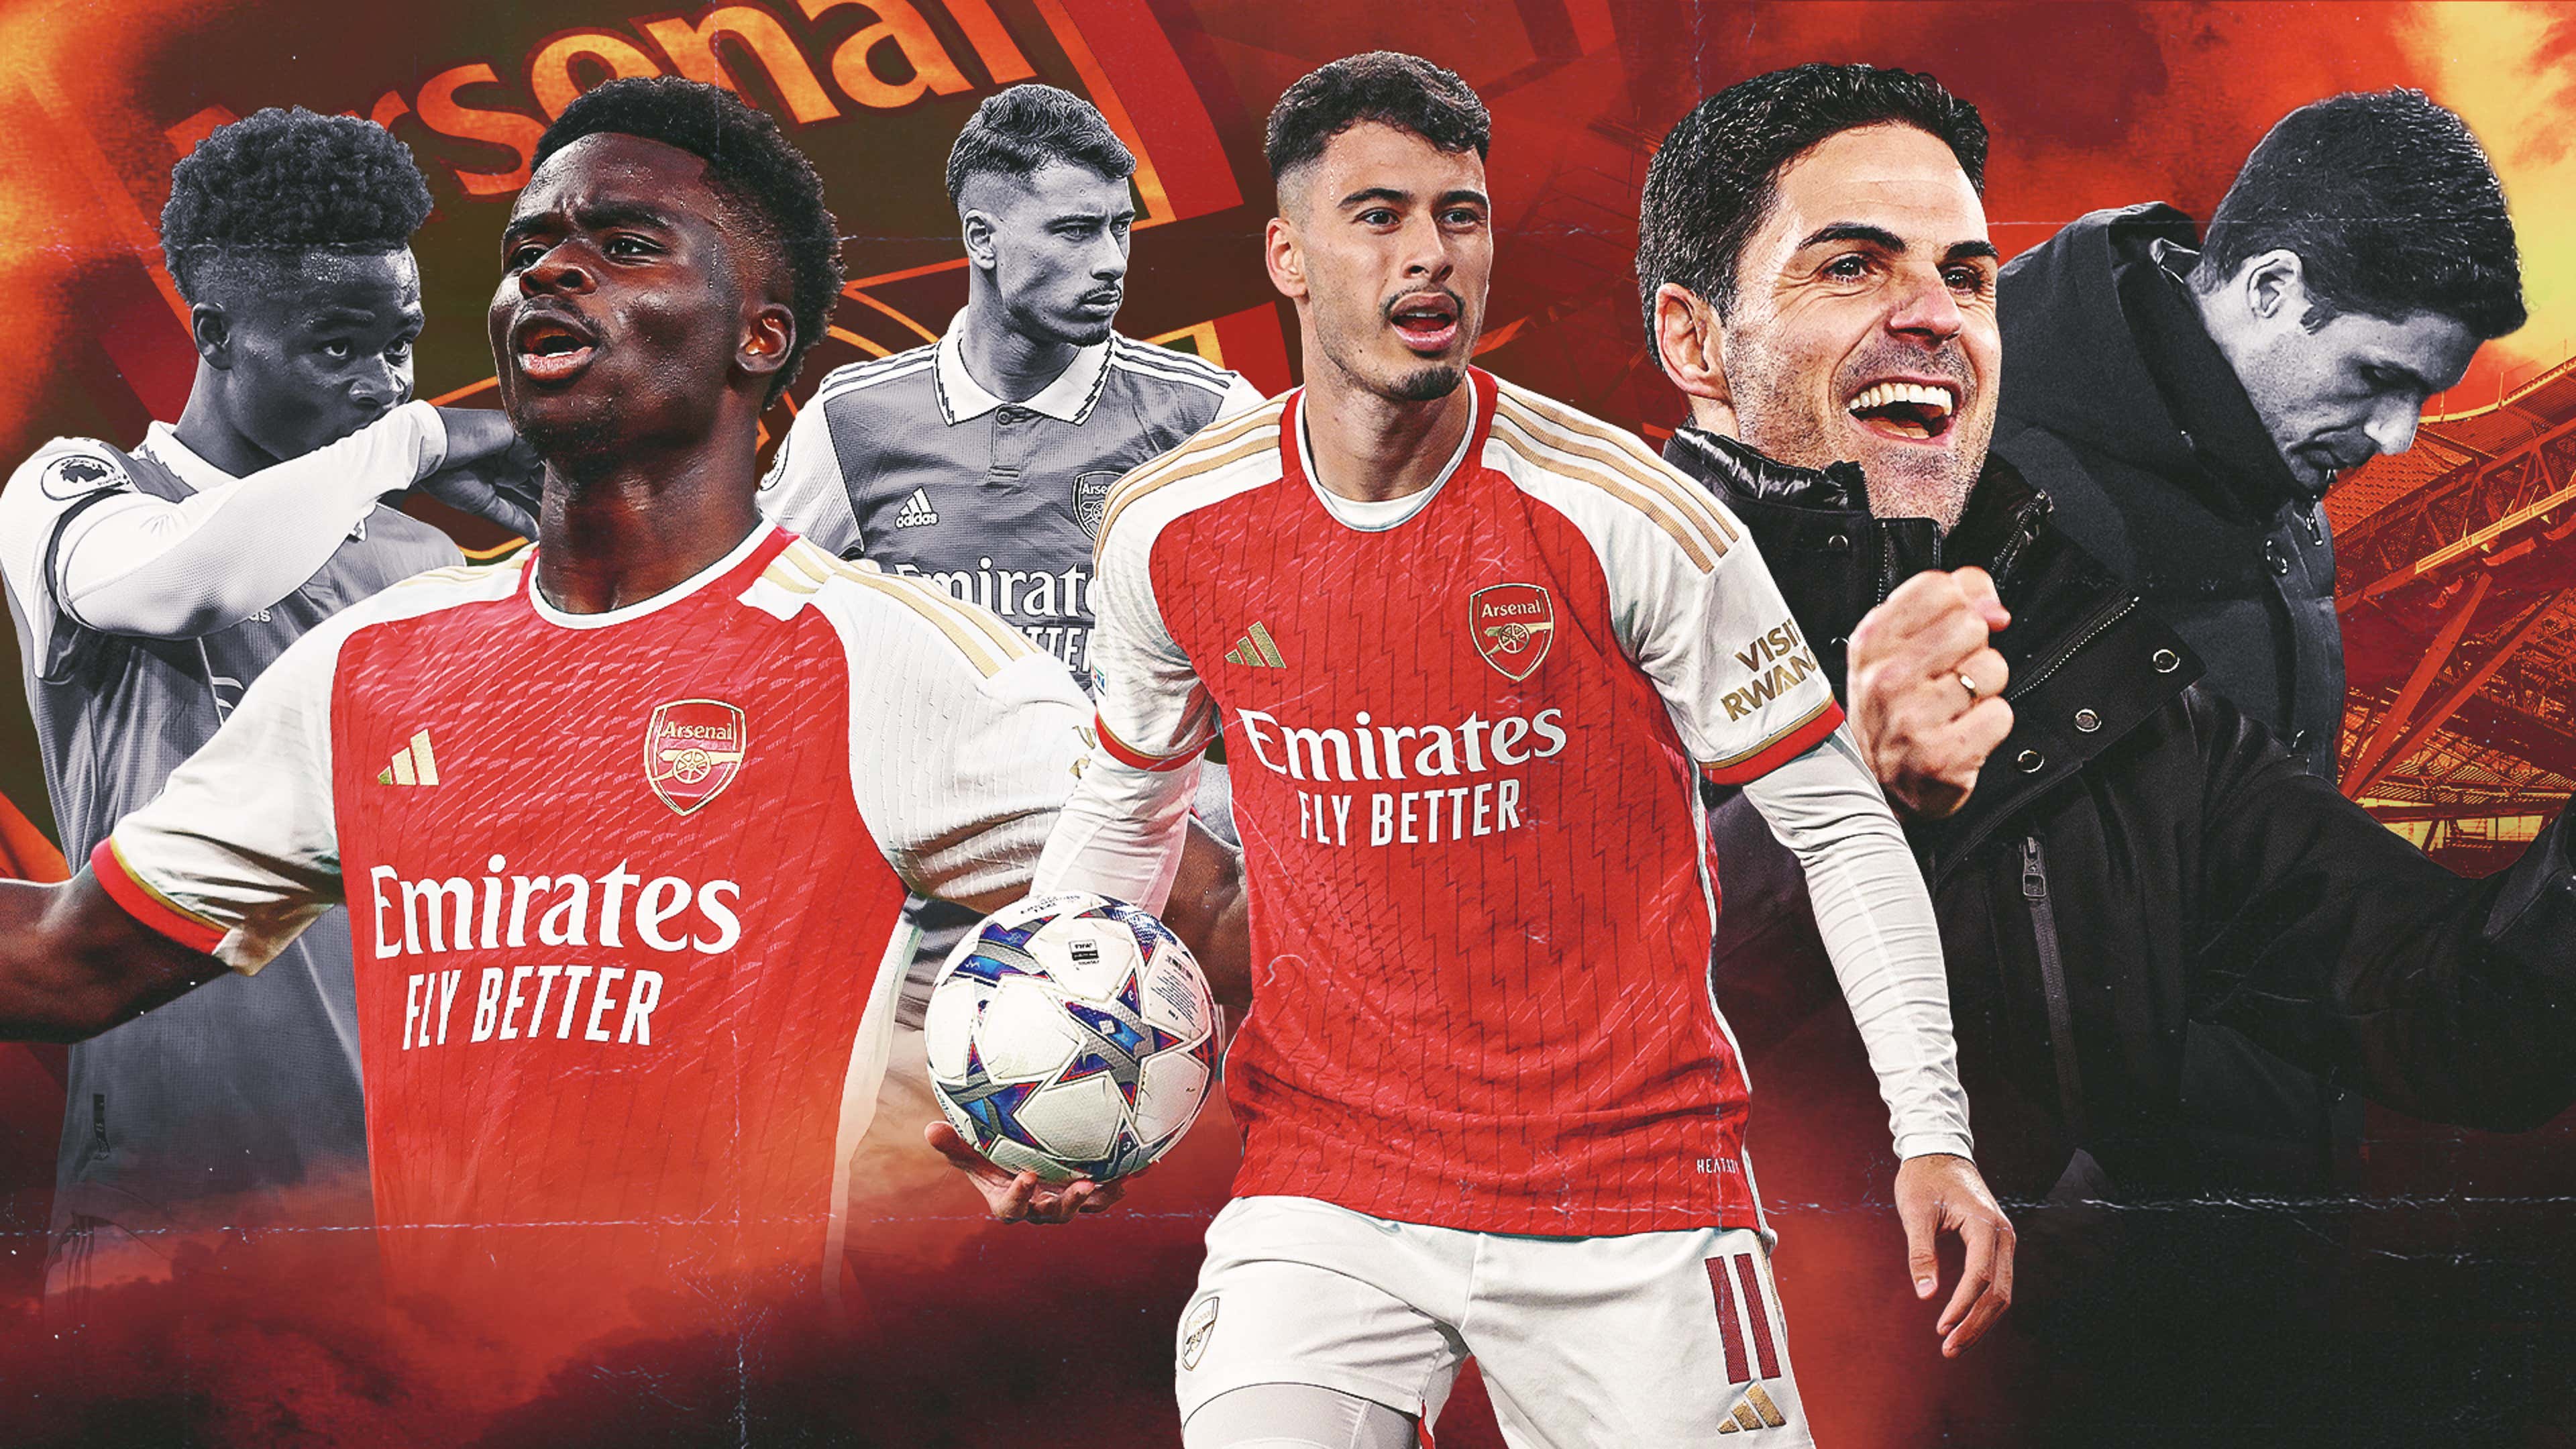 Arsenal contenders or bottlers GFX